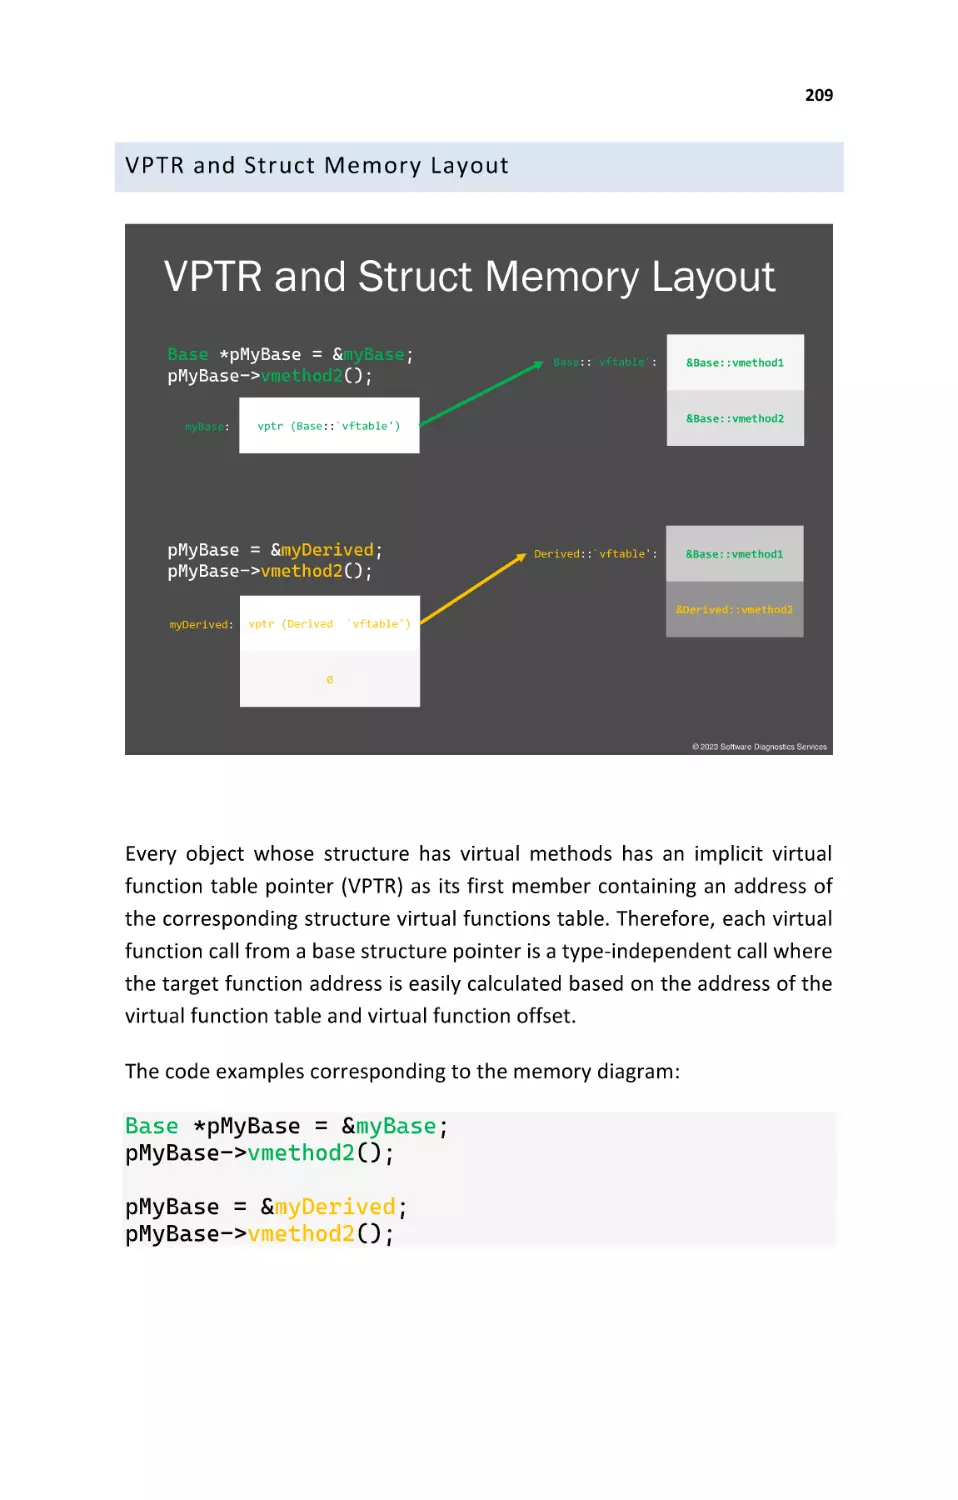 VPTR and Struct Memory Layout